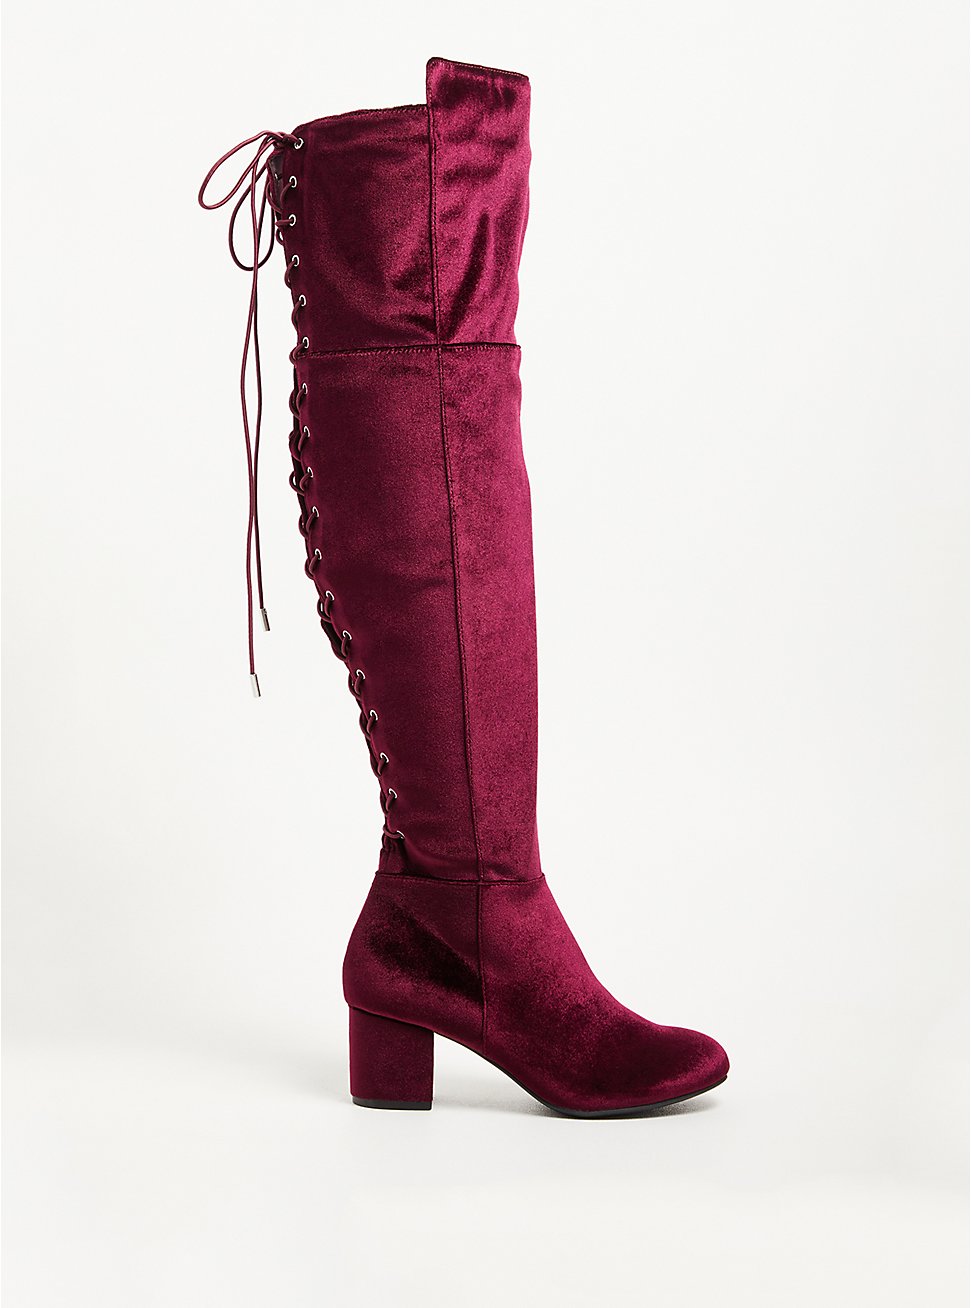 Plus Size Laceup Over The Knee Boot - Velvet Burgundy (WW), BURGUNDY, hi-res